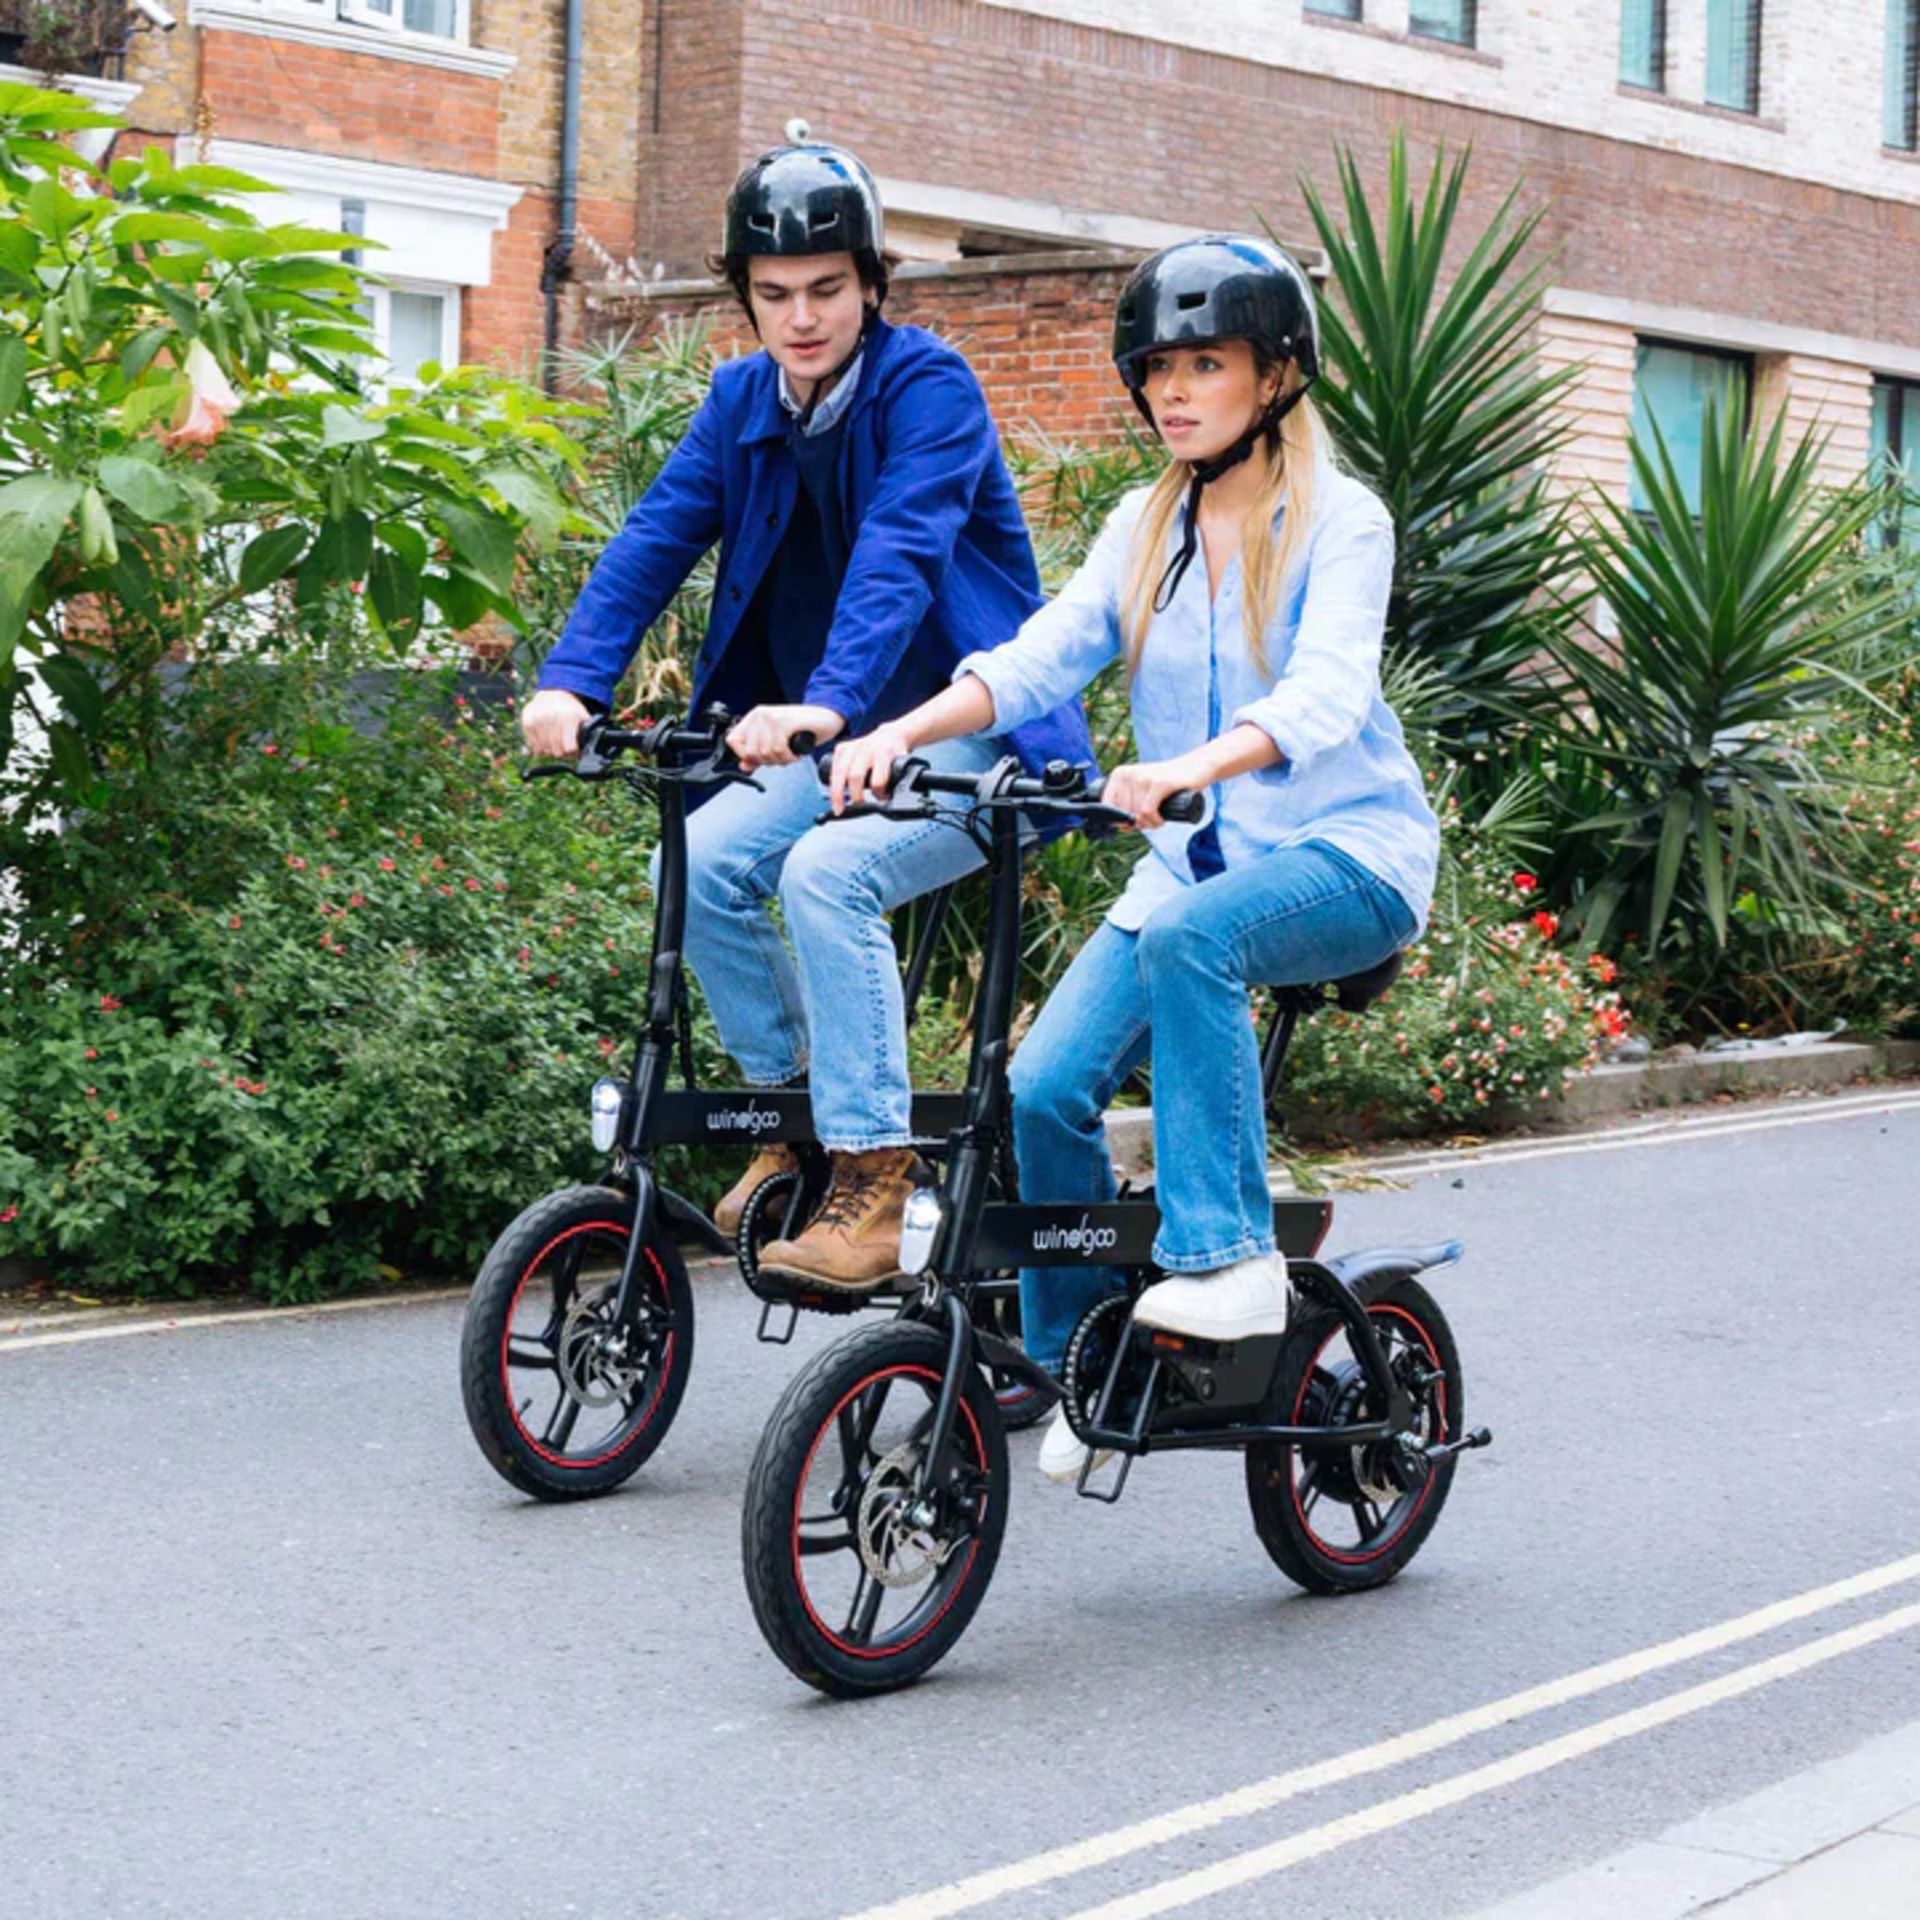 5 X Windgoo B20 Pro Electric Bike. RRP £1,100.99. With 16-inch-wide tires and a frame of upgraded - Bild 6 aus 7